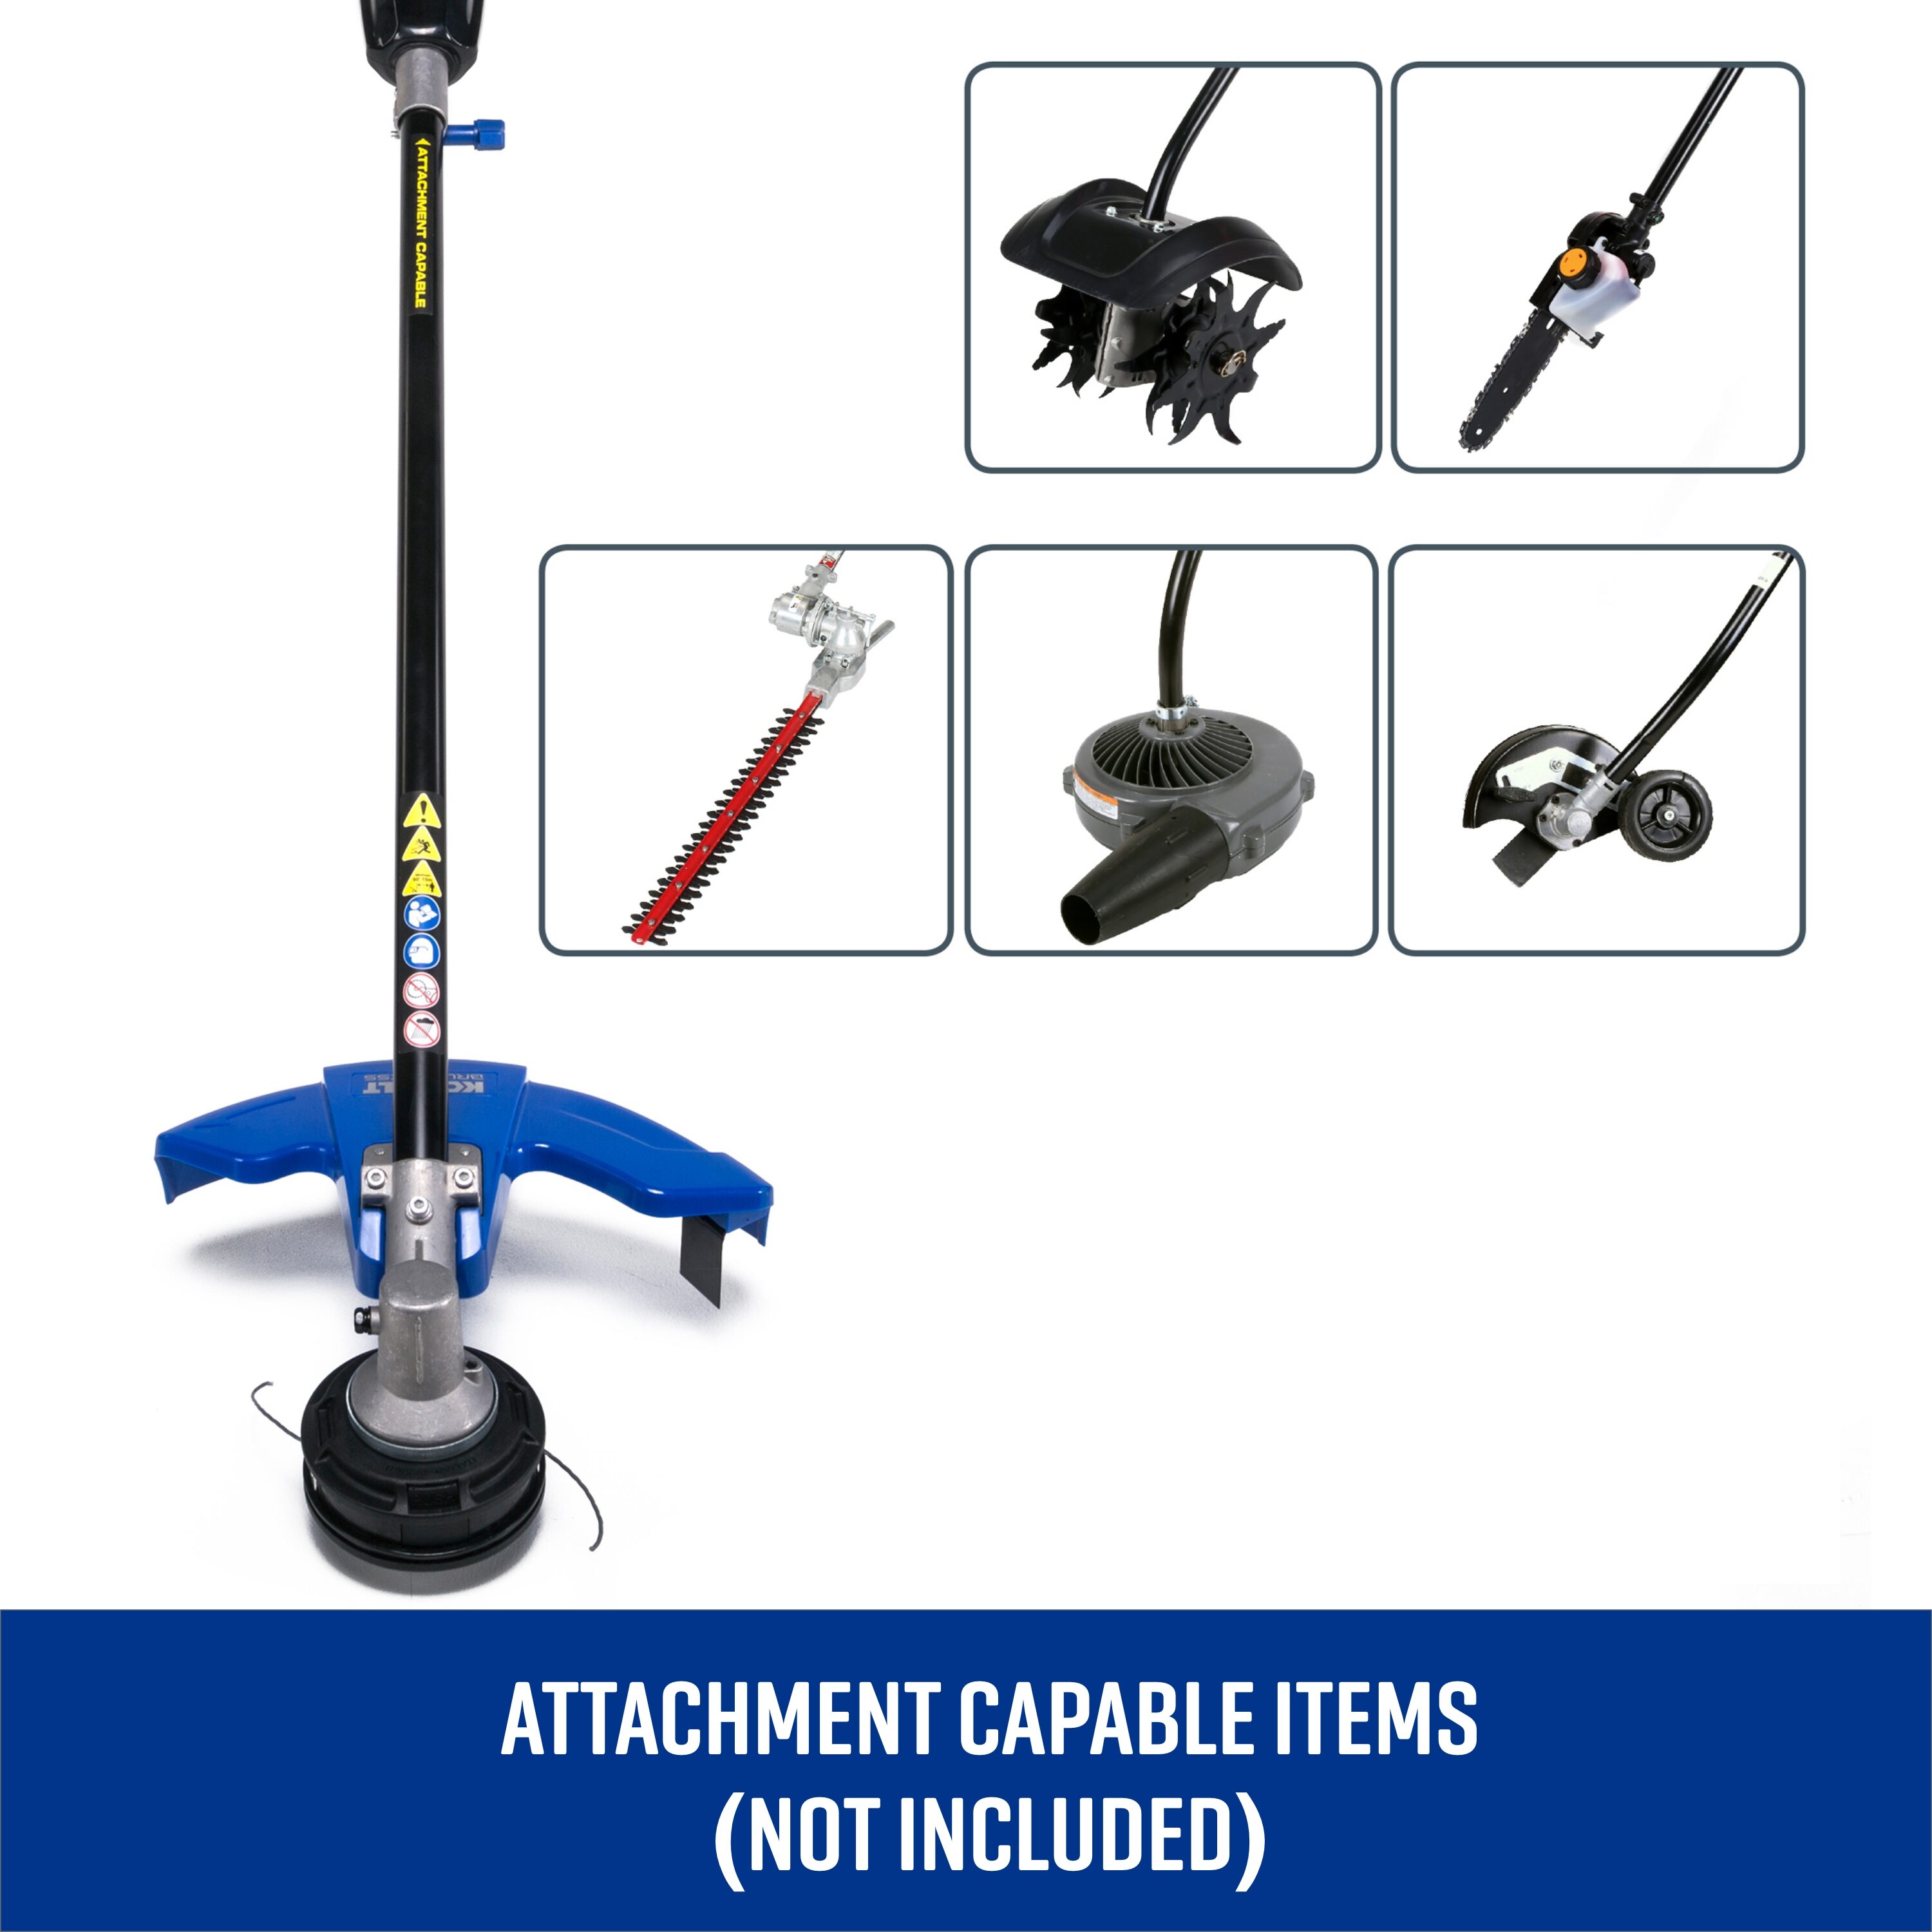 Bad Boy 80V Attachment Capable String Trimmer with Battery and Charger, 088-7505-00